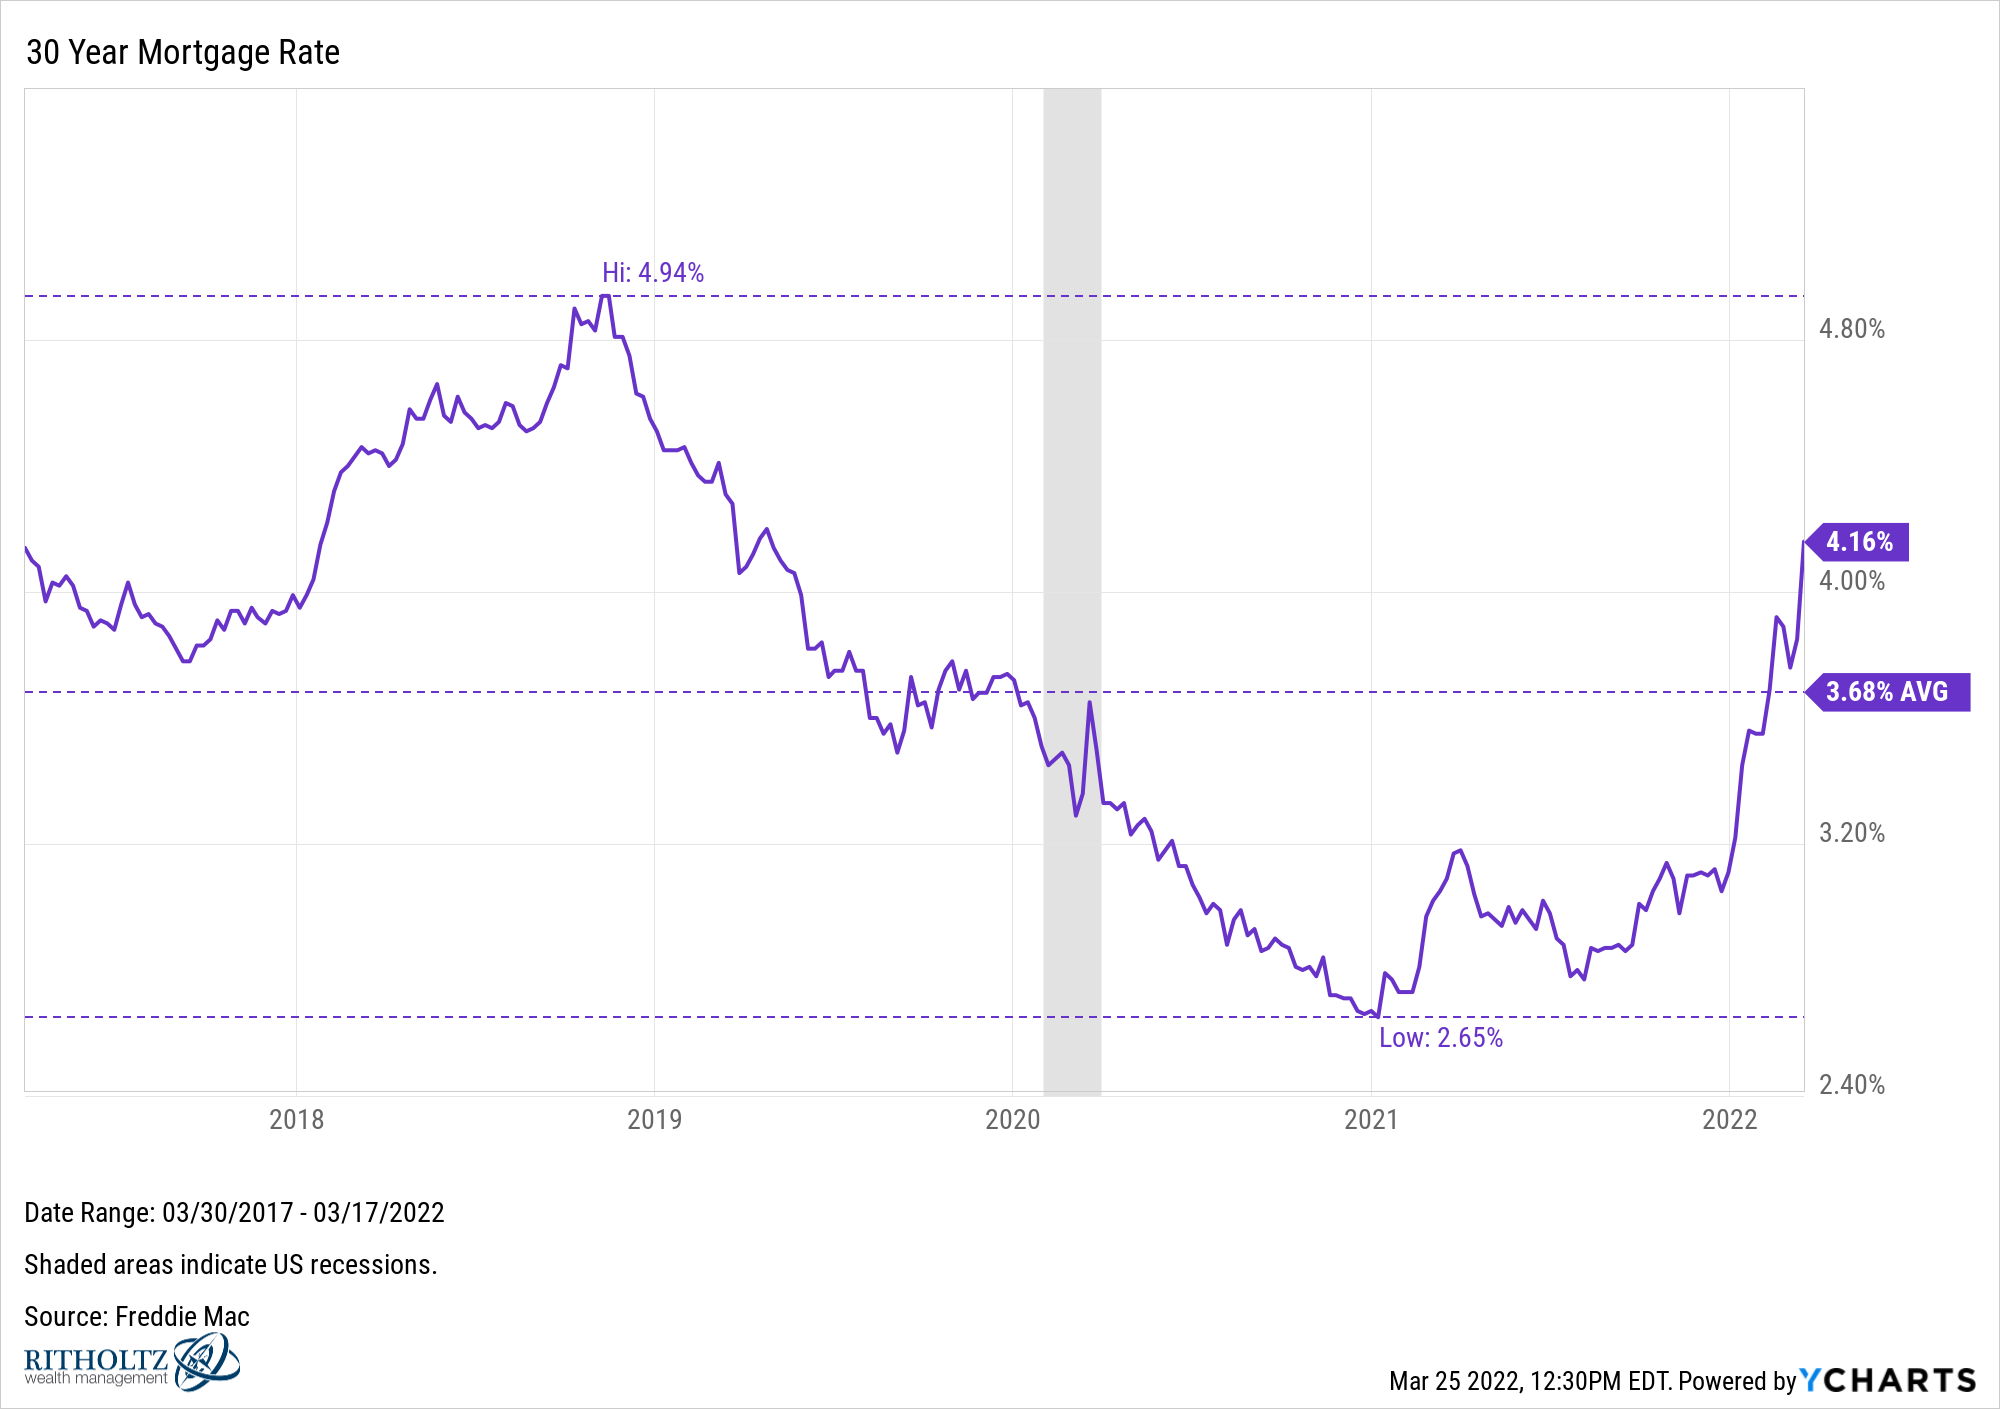 30 Year Mortgage Rate since 2017